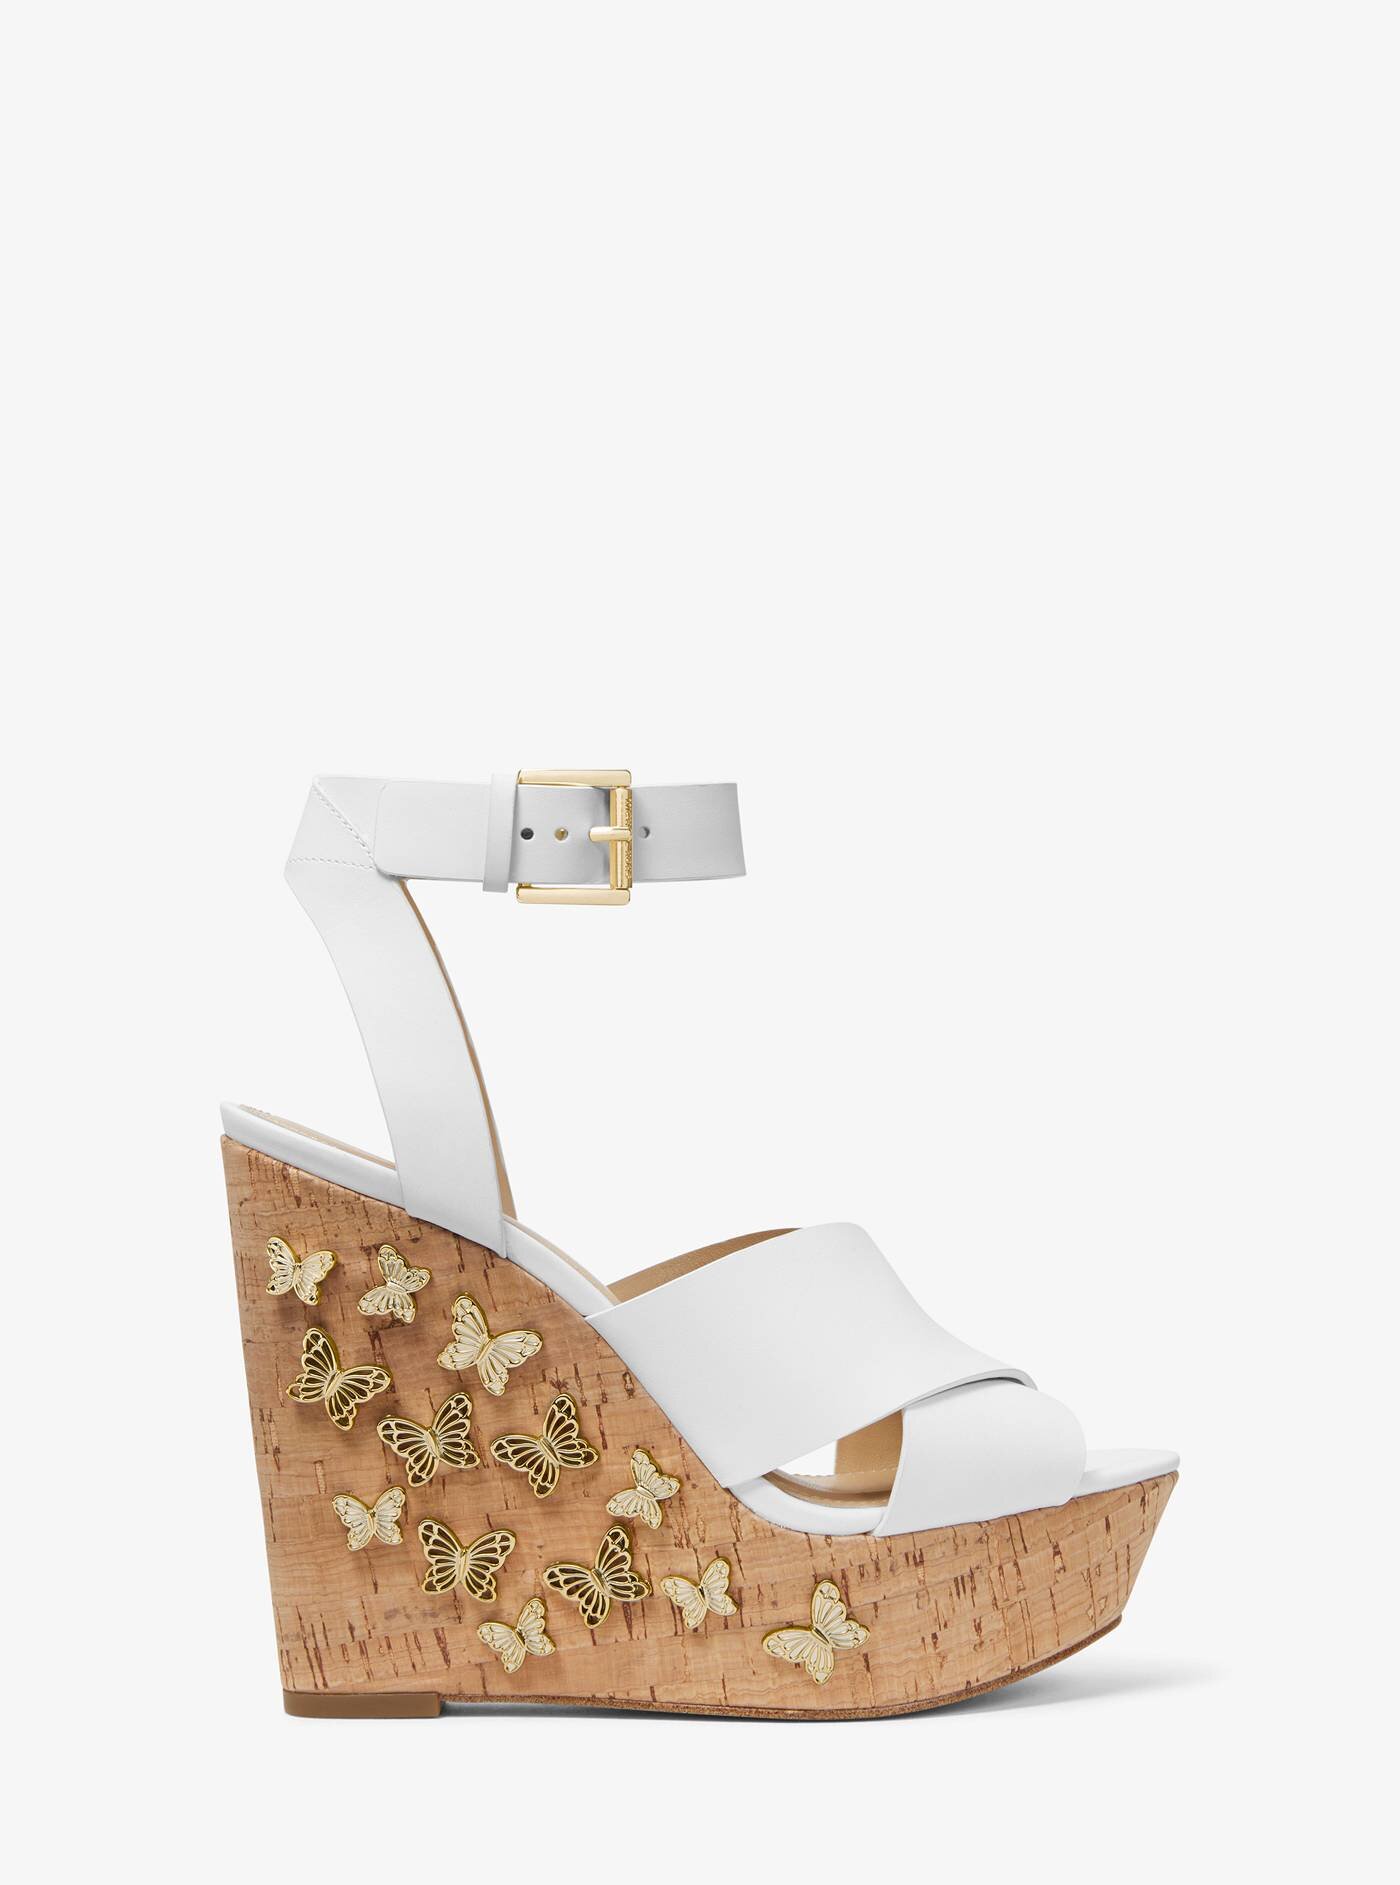 michael kors lacey wedge